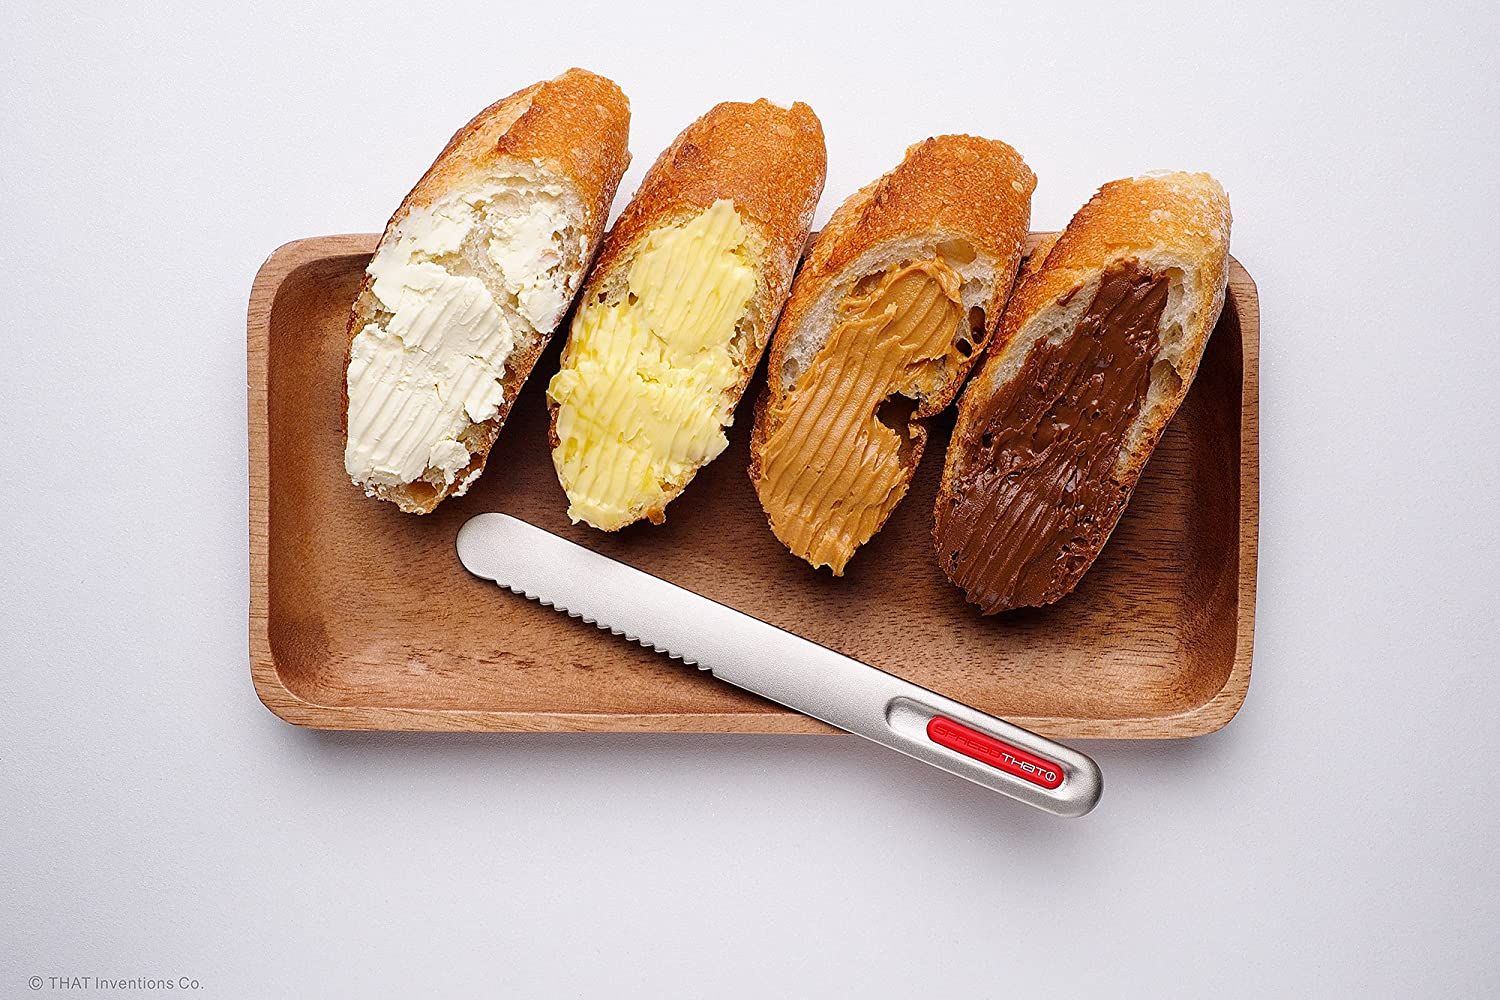 Self Heating Butter Knife  Cool Sh*t You Can Buy - Find Cool Things To Buy